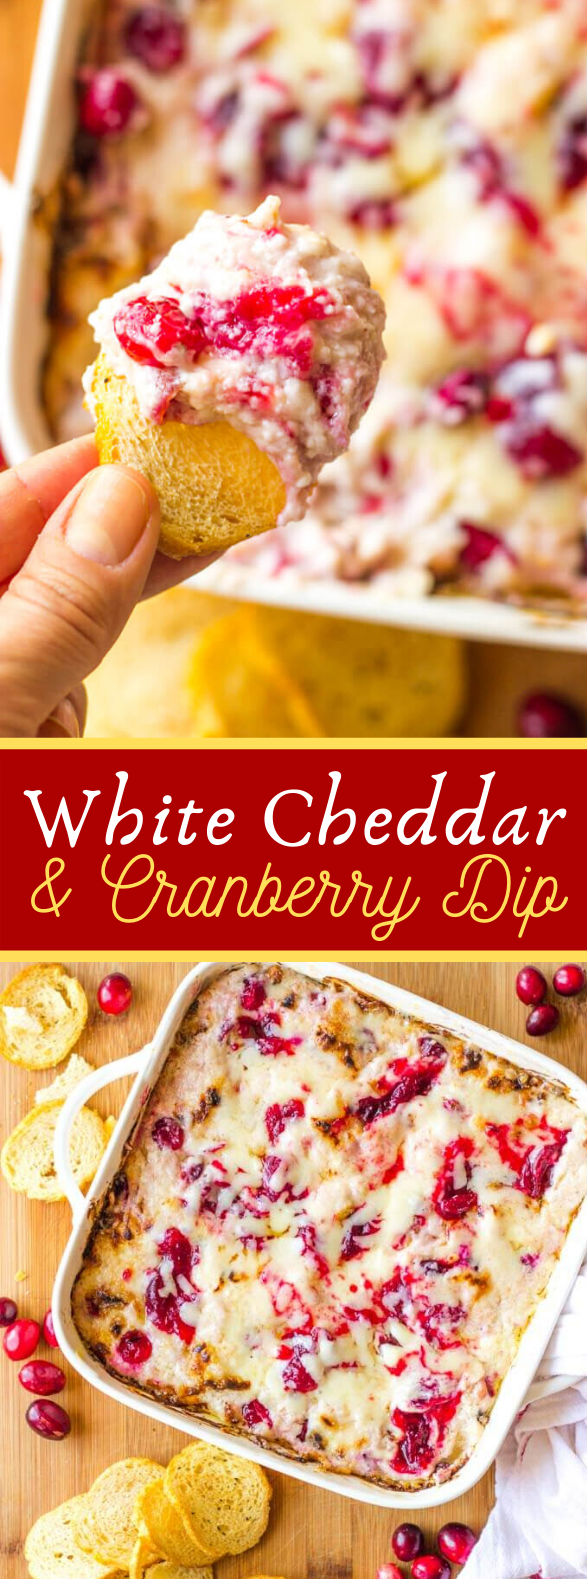 WHITE CHEDDAR AND CRANBERRY DIP #appetizers #homemade